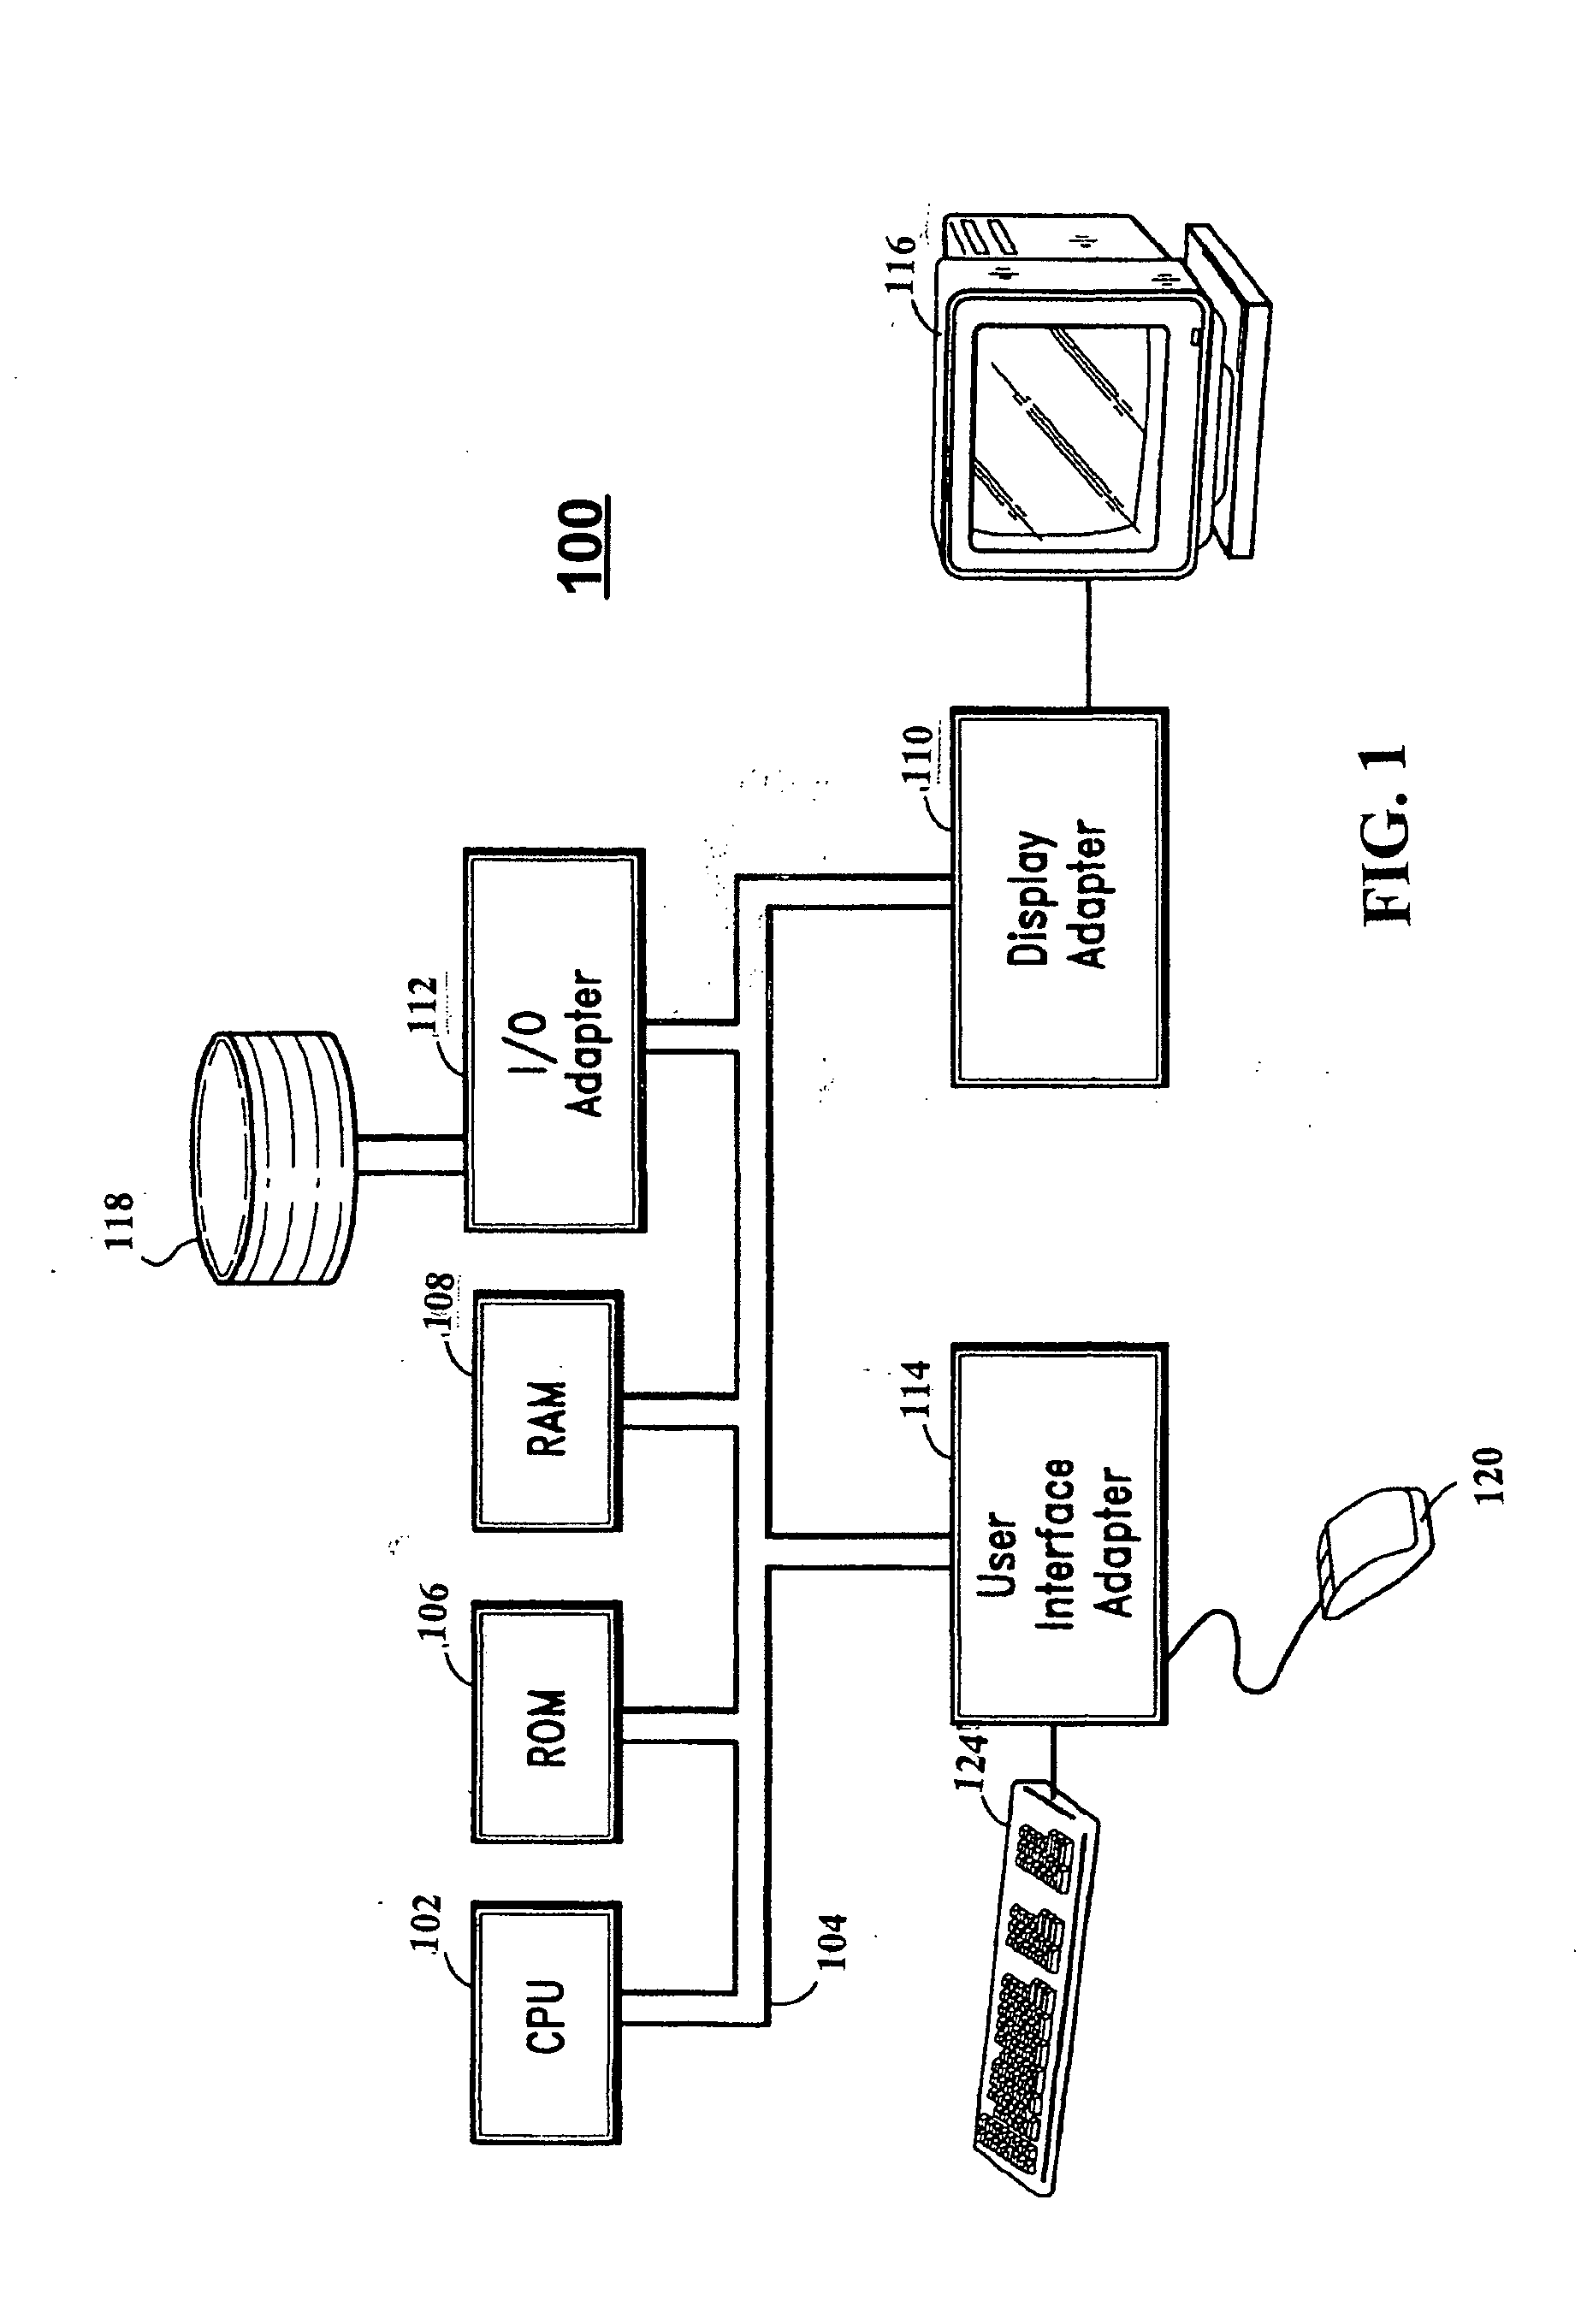 Method, system and article for detecting critical memory leaks causing out-of-memory errors in Java software